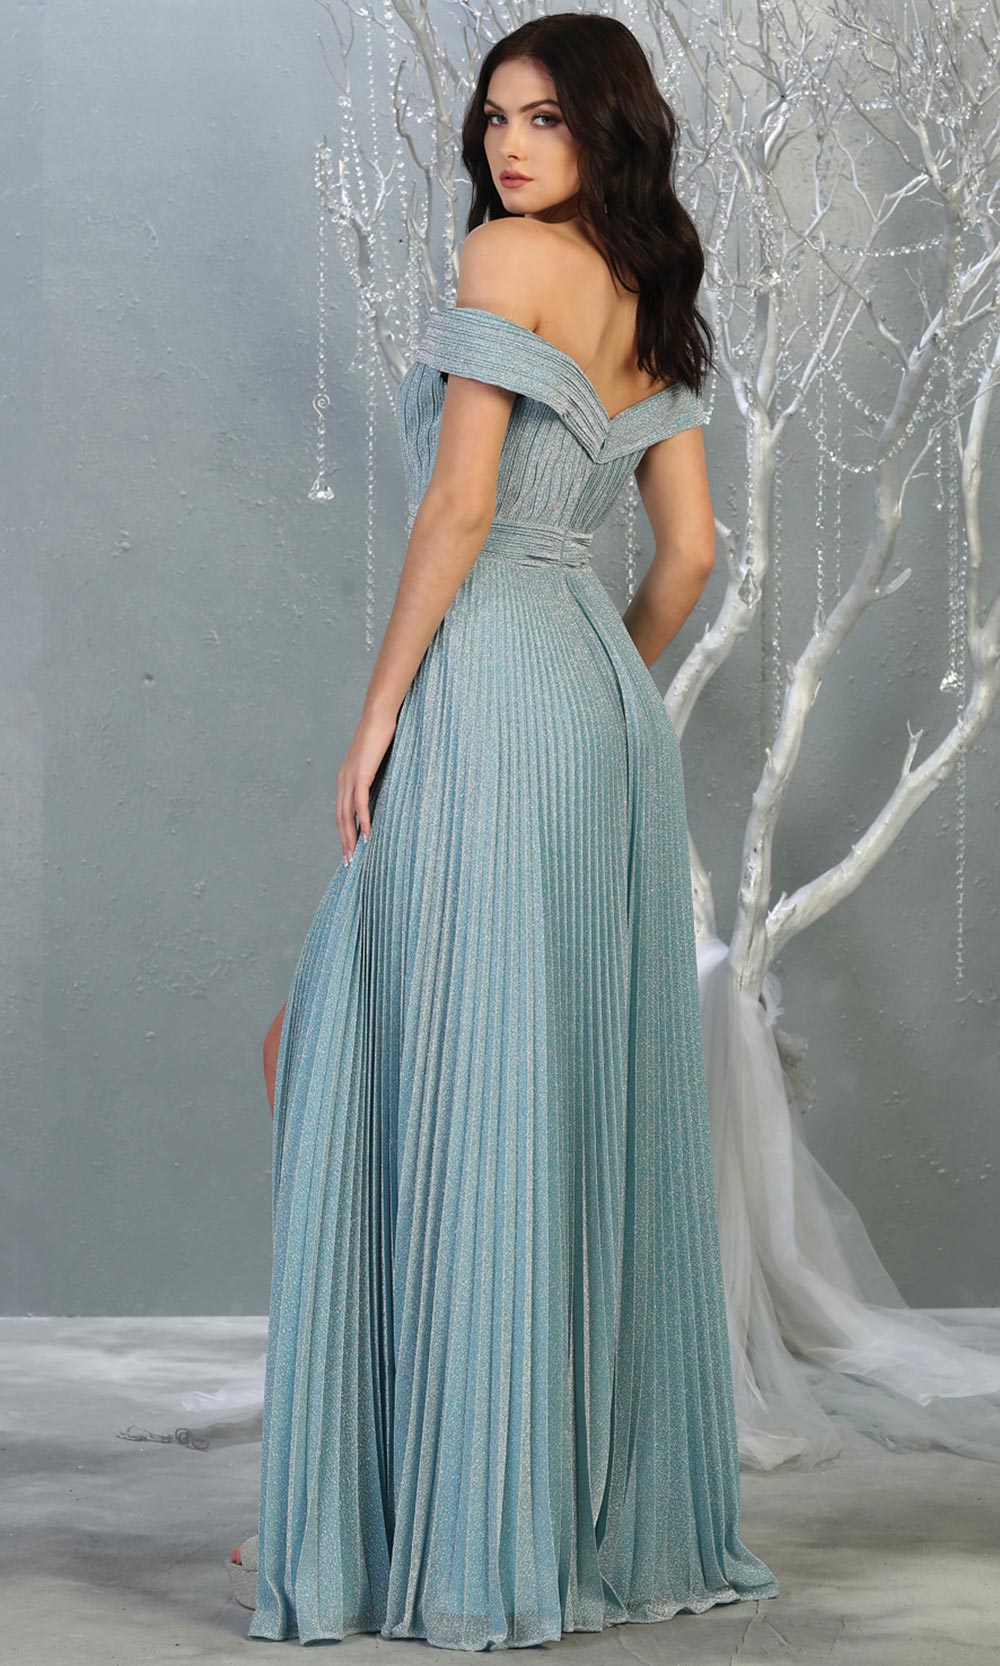 Mayqueen RQ7876 long dusty blue metallic off shoulder evening gown w/crinkle skirt. Full length flowy dress is perfect for  enagagement/e-shoot dress, formal wedding guest, evening party dress, prom, bridesmaids, black tie, gala. Plus sizes avail-b.jpg